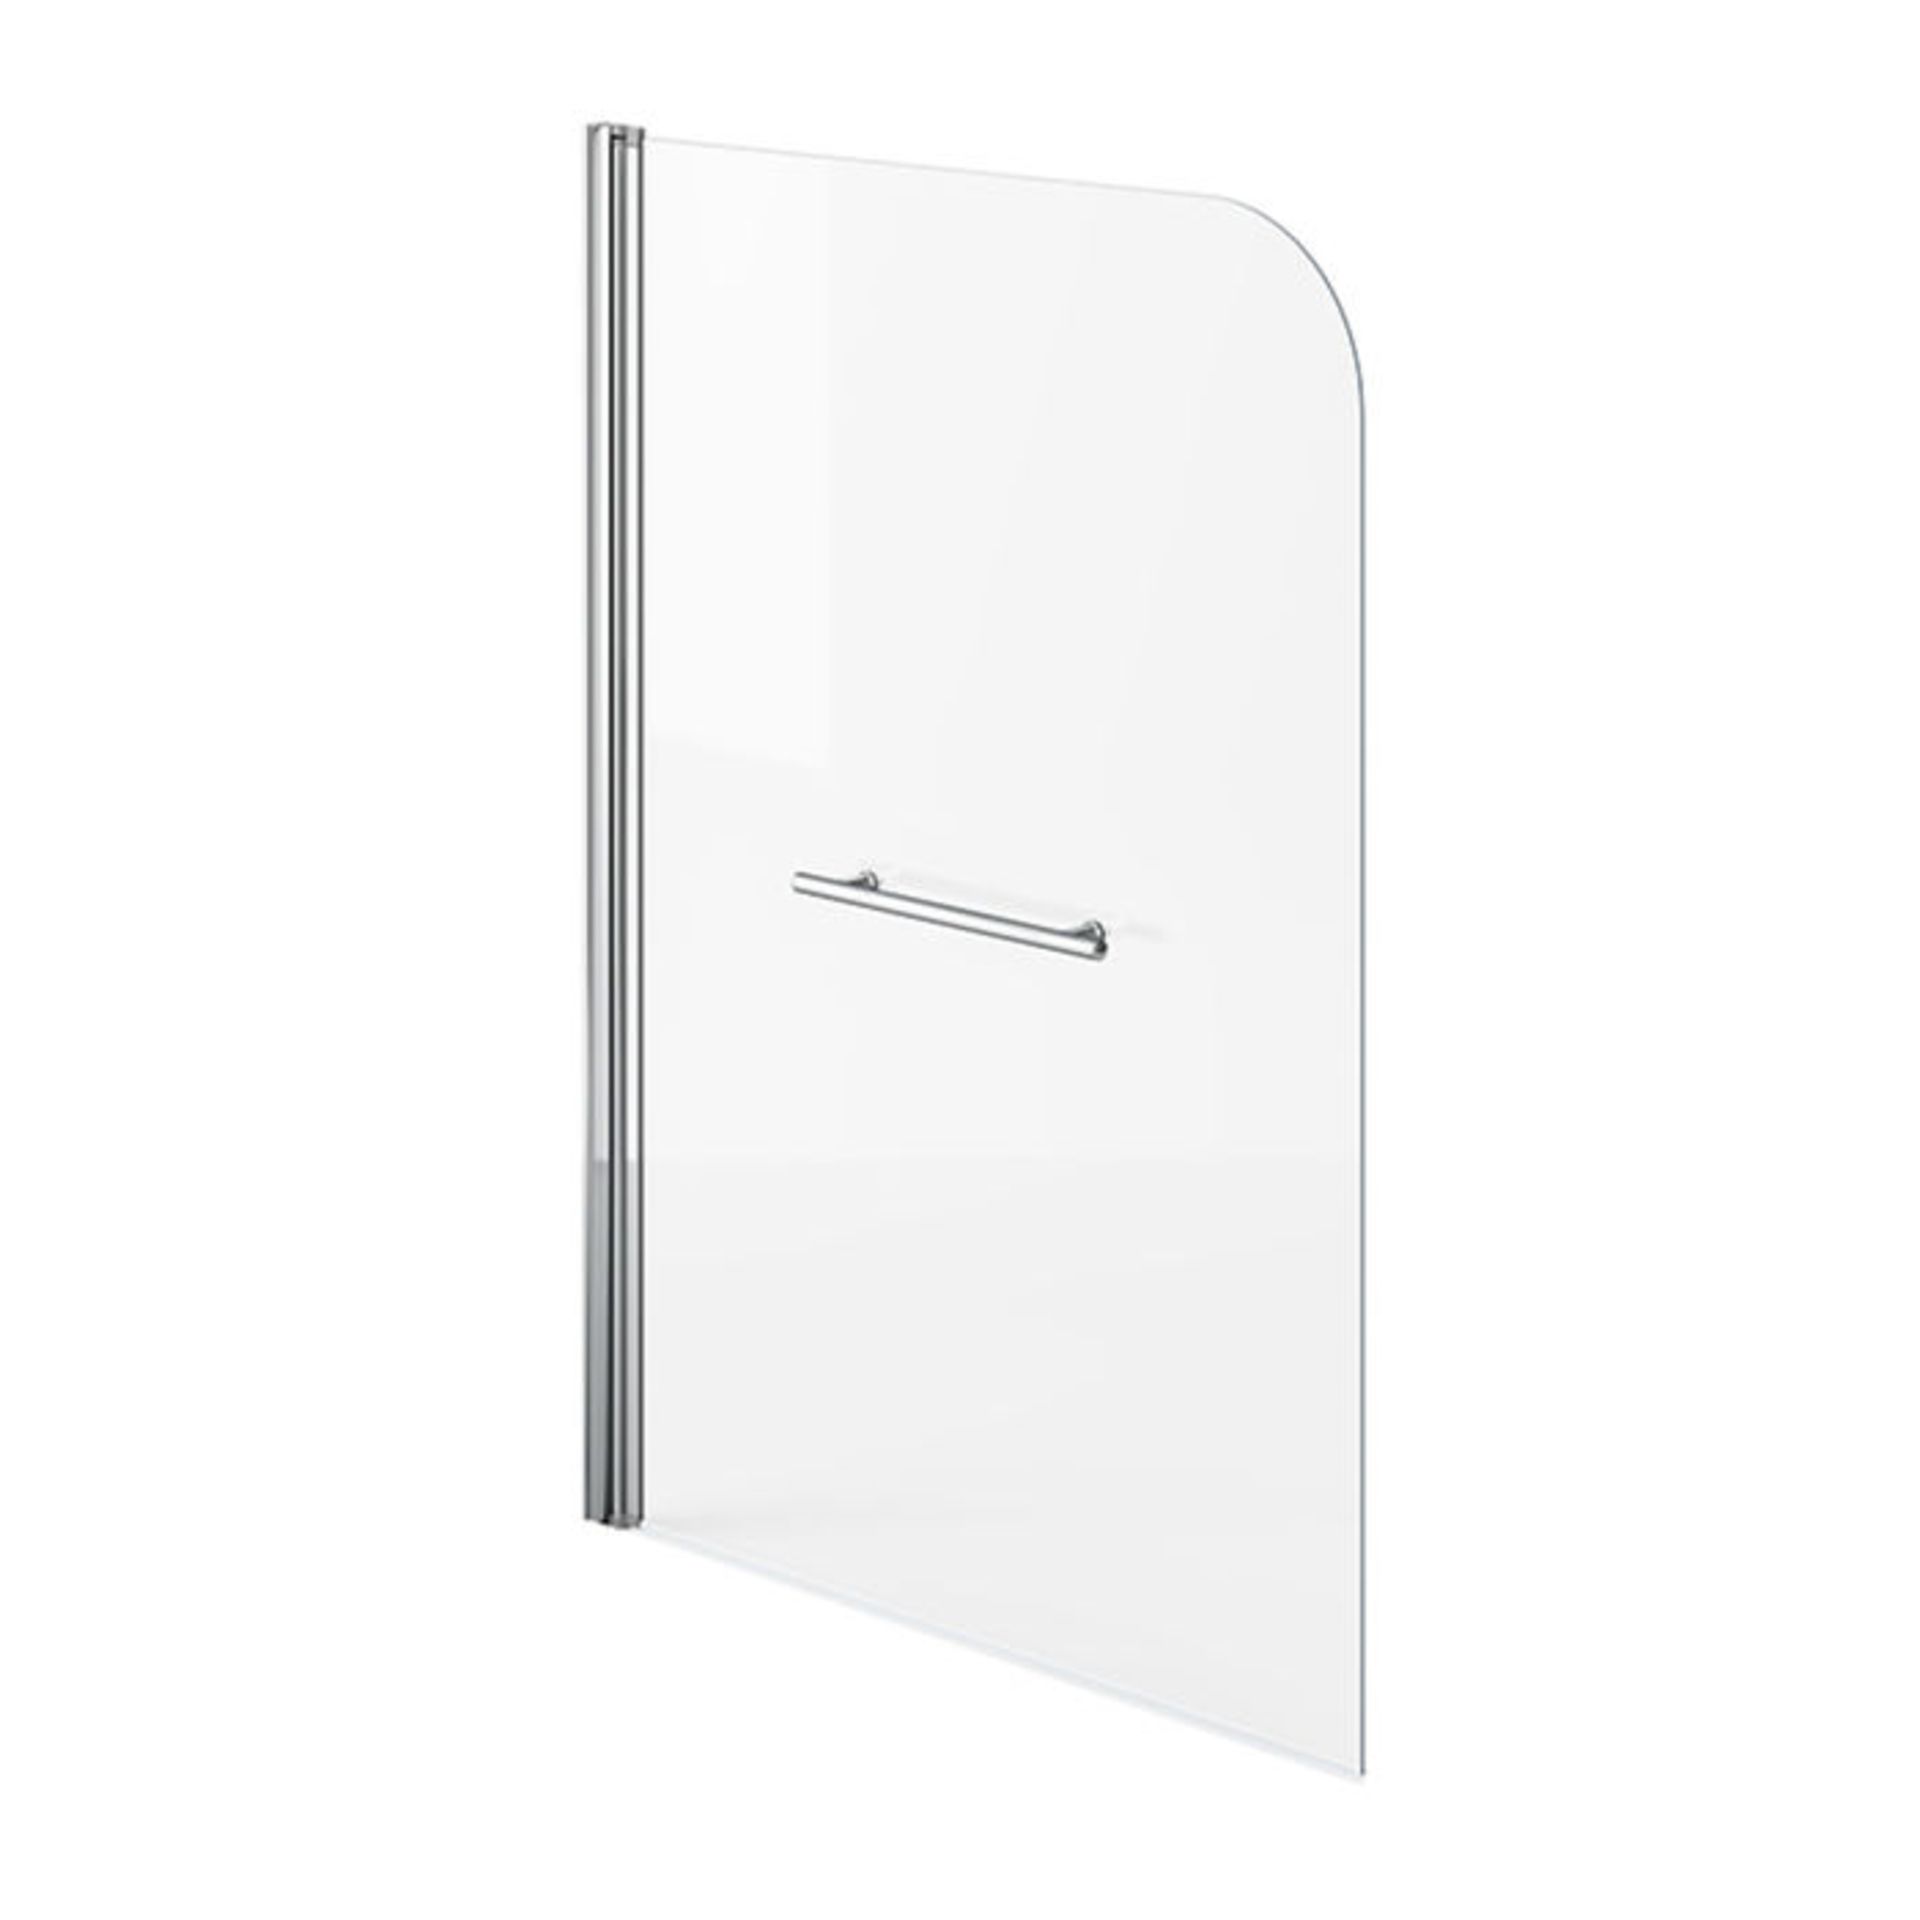 (ZL21) 1000mm Bath Shower Screen & Rail. Features a convenient towel rail 4mm tempered safety